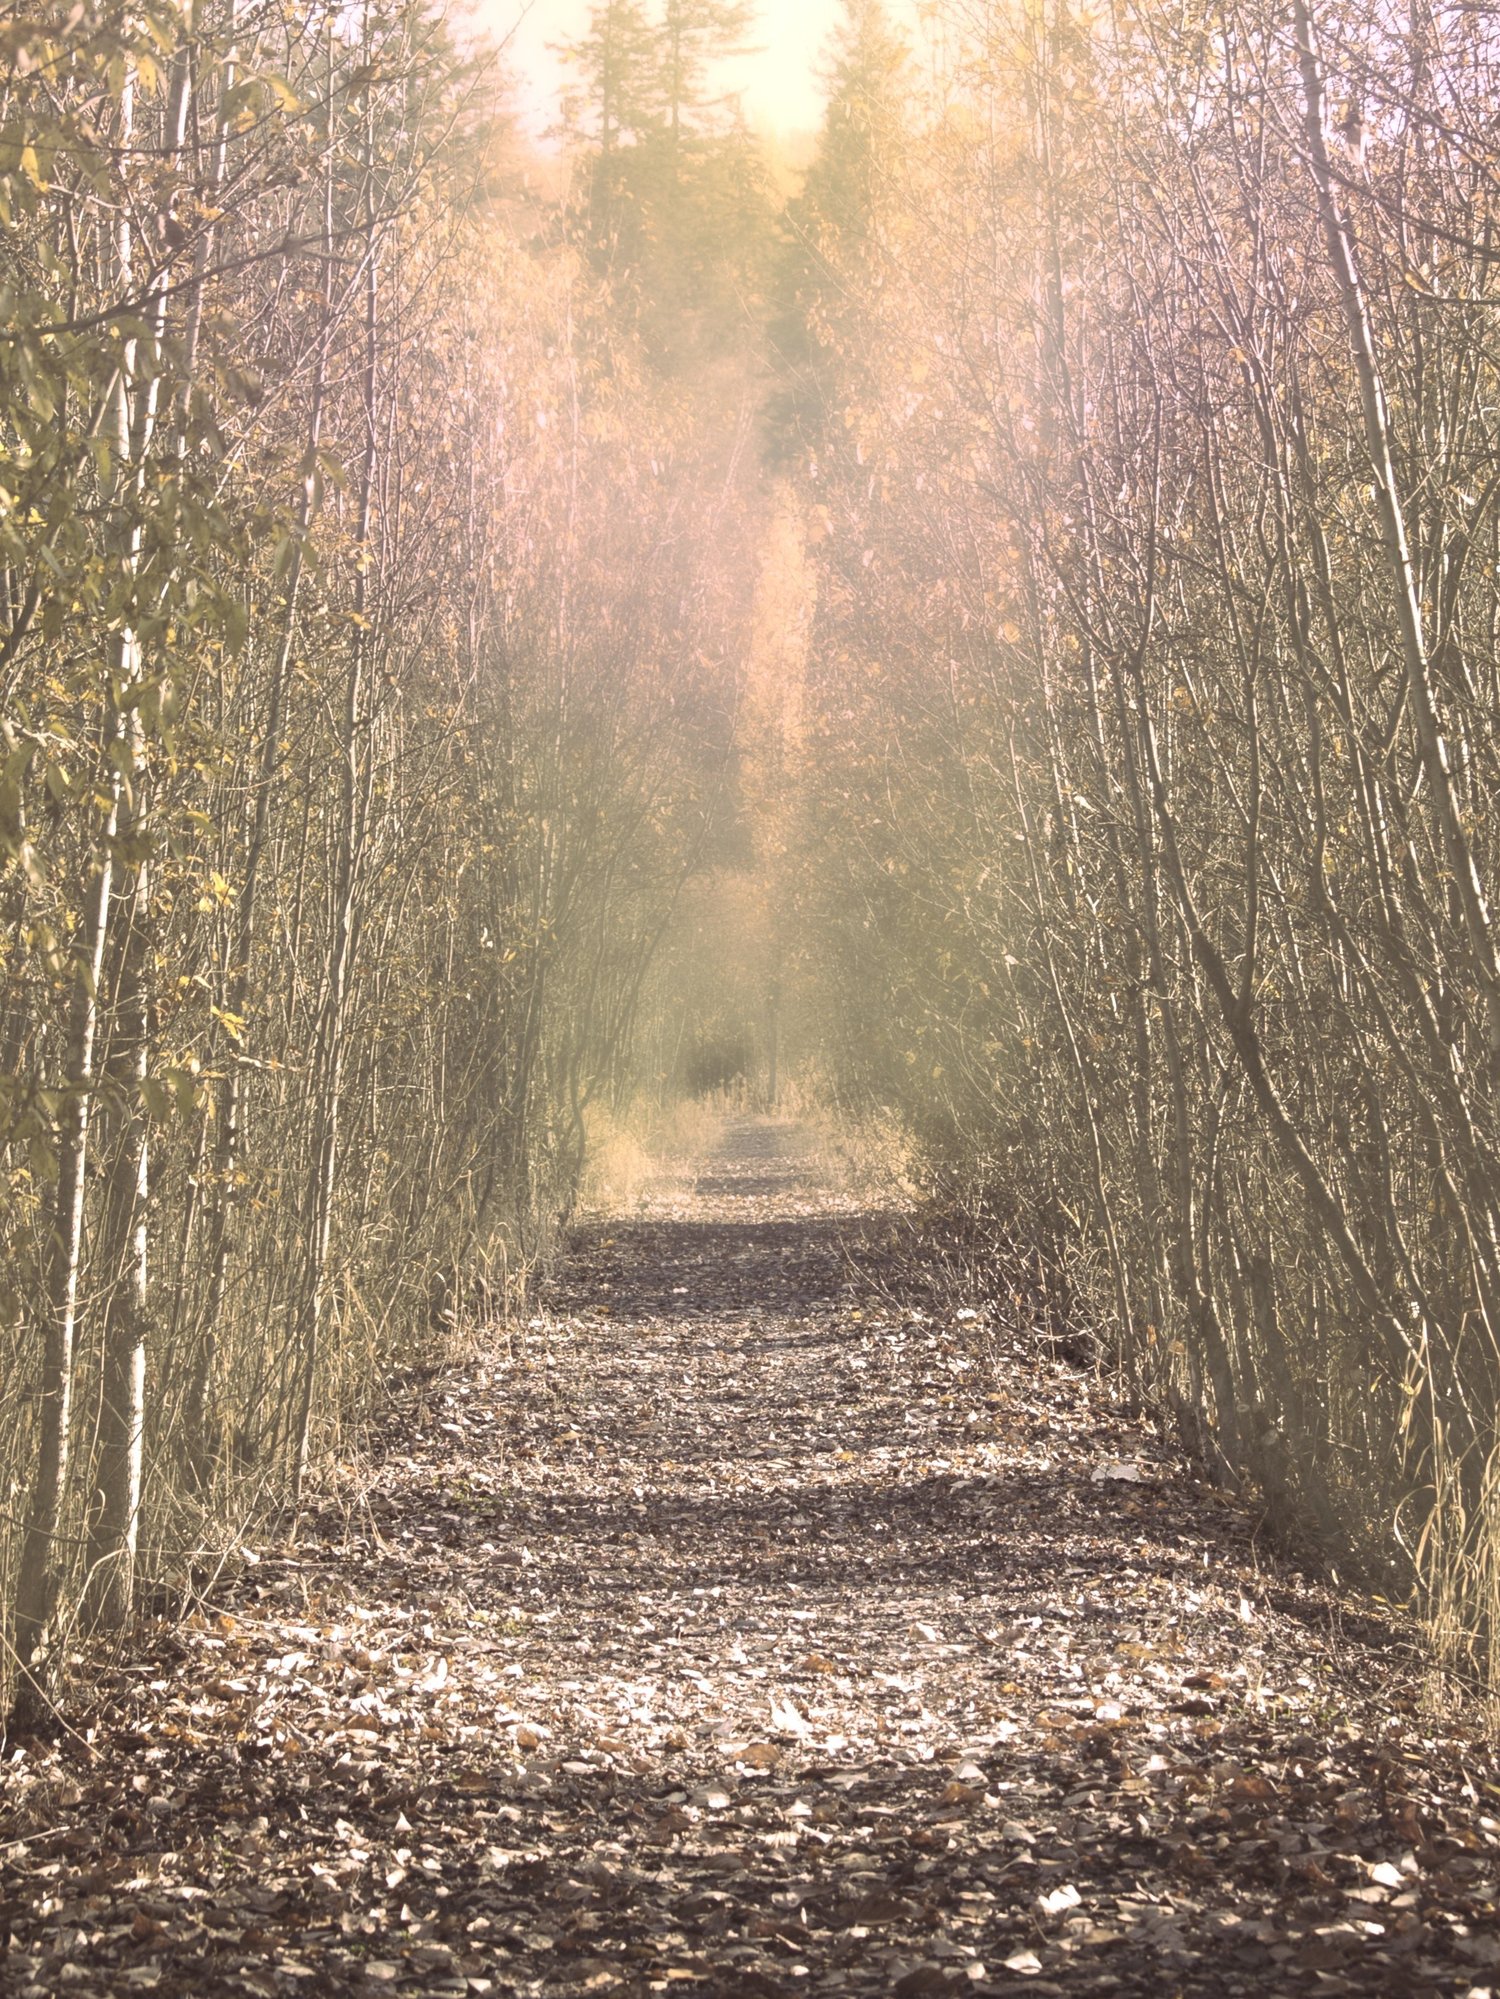 Clear Path Psychotherapy